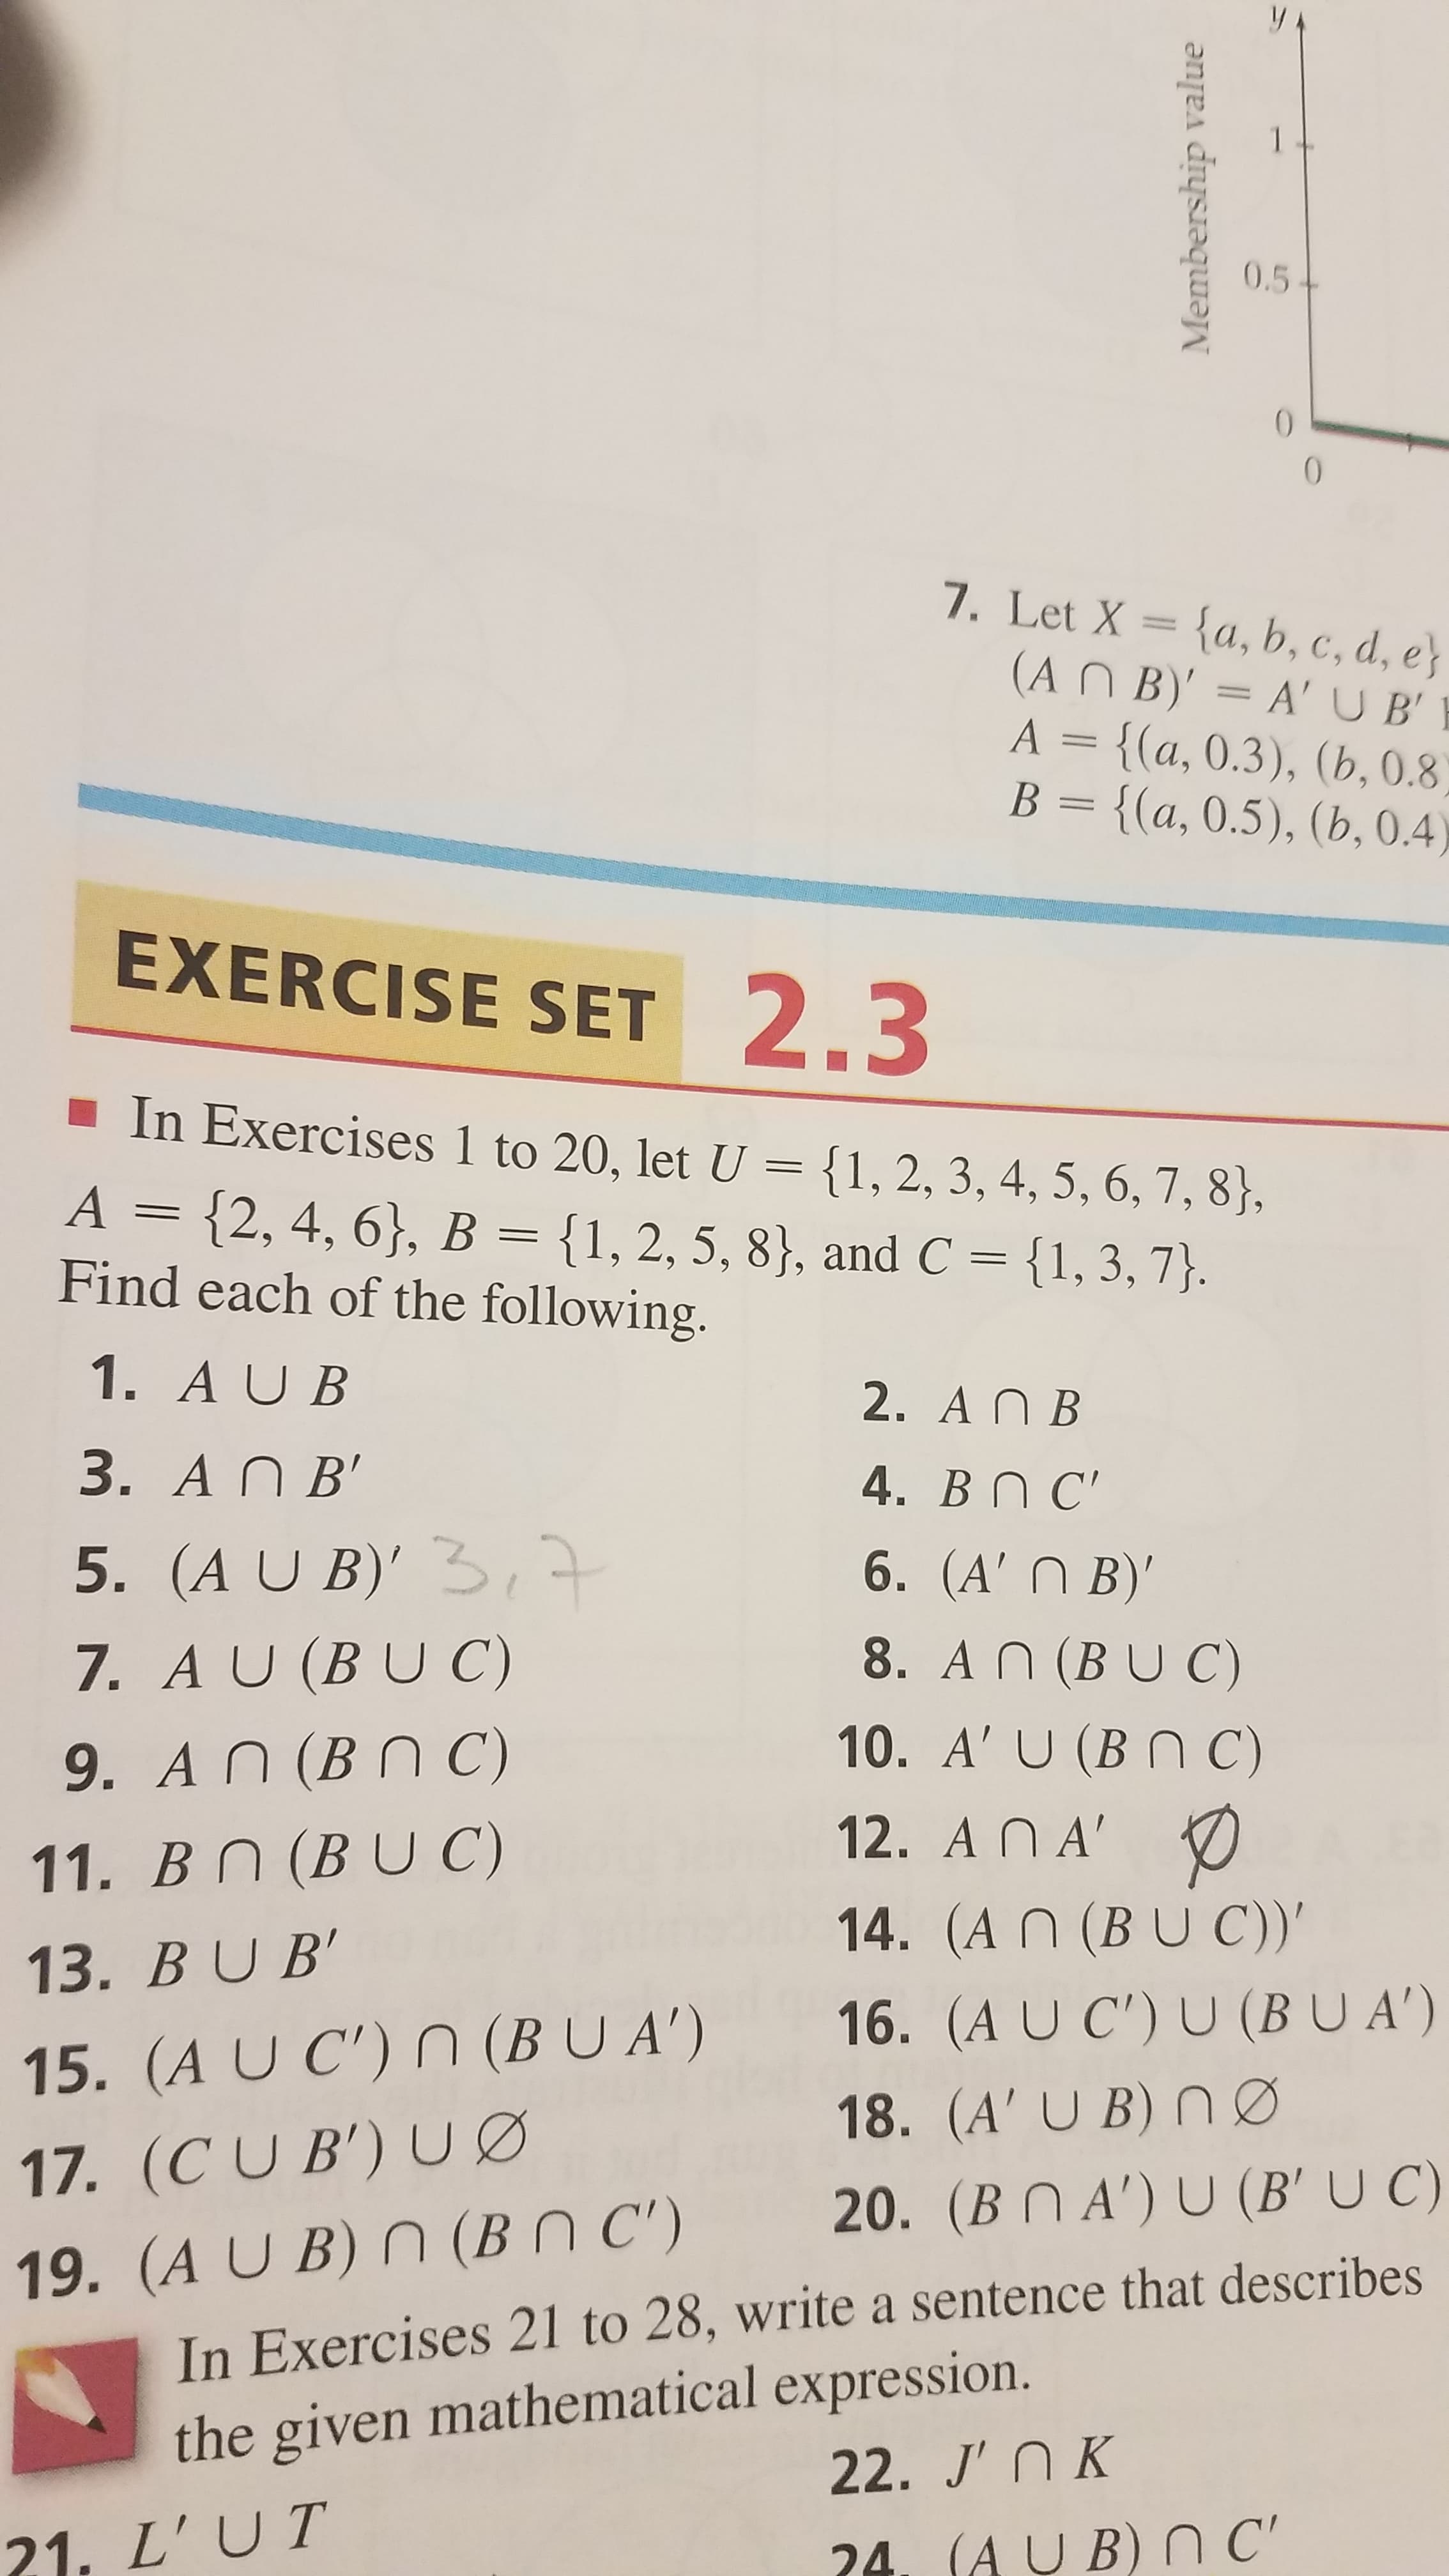 0.5
0
0
7. Let X ={a, b, c, d, e
(An B)' A'UB
A = {(a, 0.3), (b, 0.8)
B {(a, 0.5), (b, 0.4)
EXERCISE SET 2.3
In Exercises 1 to 20, let U = {1, 2, 3, 4, 5, 6, 7, 8},
A {2, 4, 6}, B {1, 2, 5, 8}, and C {1, 3, 7}.
Find each of the following.
-
1. AU B
2. An B
3. An B'
4. Bn C'
7
6. (A'n B)'
8. An (BUC)
5. (A U B)'
7. A U (BUC)
10. A' U (Bn C)
9. An (Bn C)
12. An A'
11. Bn (BUC)
14. (An (BU C))'
13. BU B'
16. (A UC') U (BUA')
15. (A U C') n (BUA')
18. (A' U B) n0
20. (Bn A') U (B' U C)
17. (CUB) U
19. (A U B) n (Bn C')
In Exercises 21 to 28, write a sentence that describes
the given mathematical expression.
22. J' nK
24, (AU B) n C
21. L' UT
Membership value
